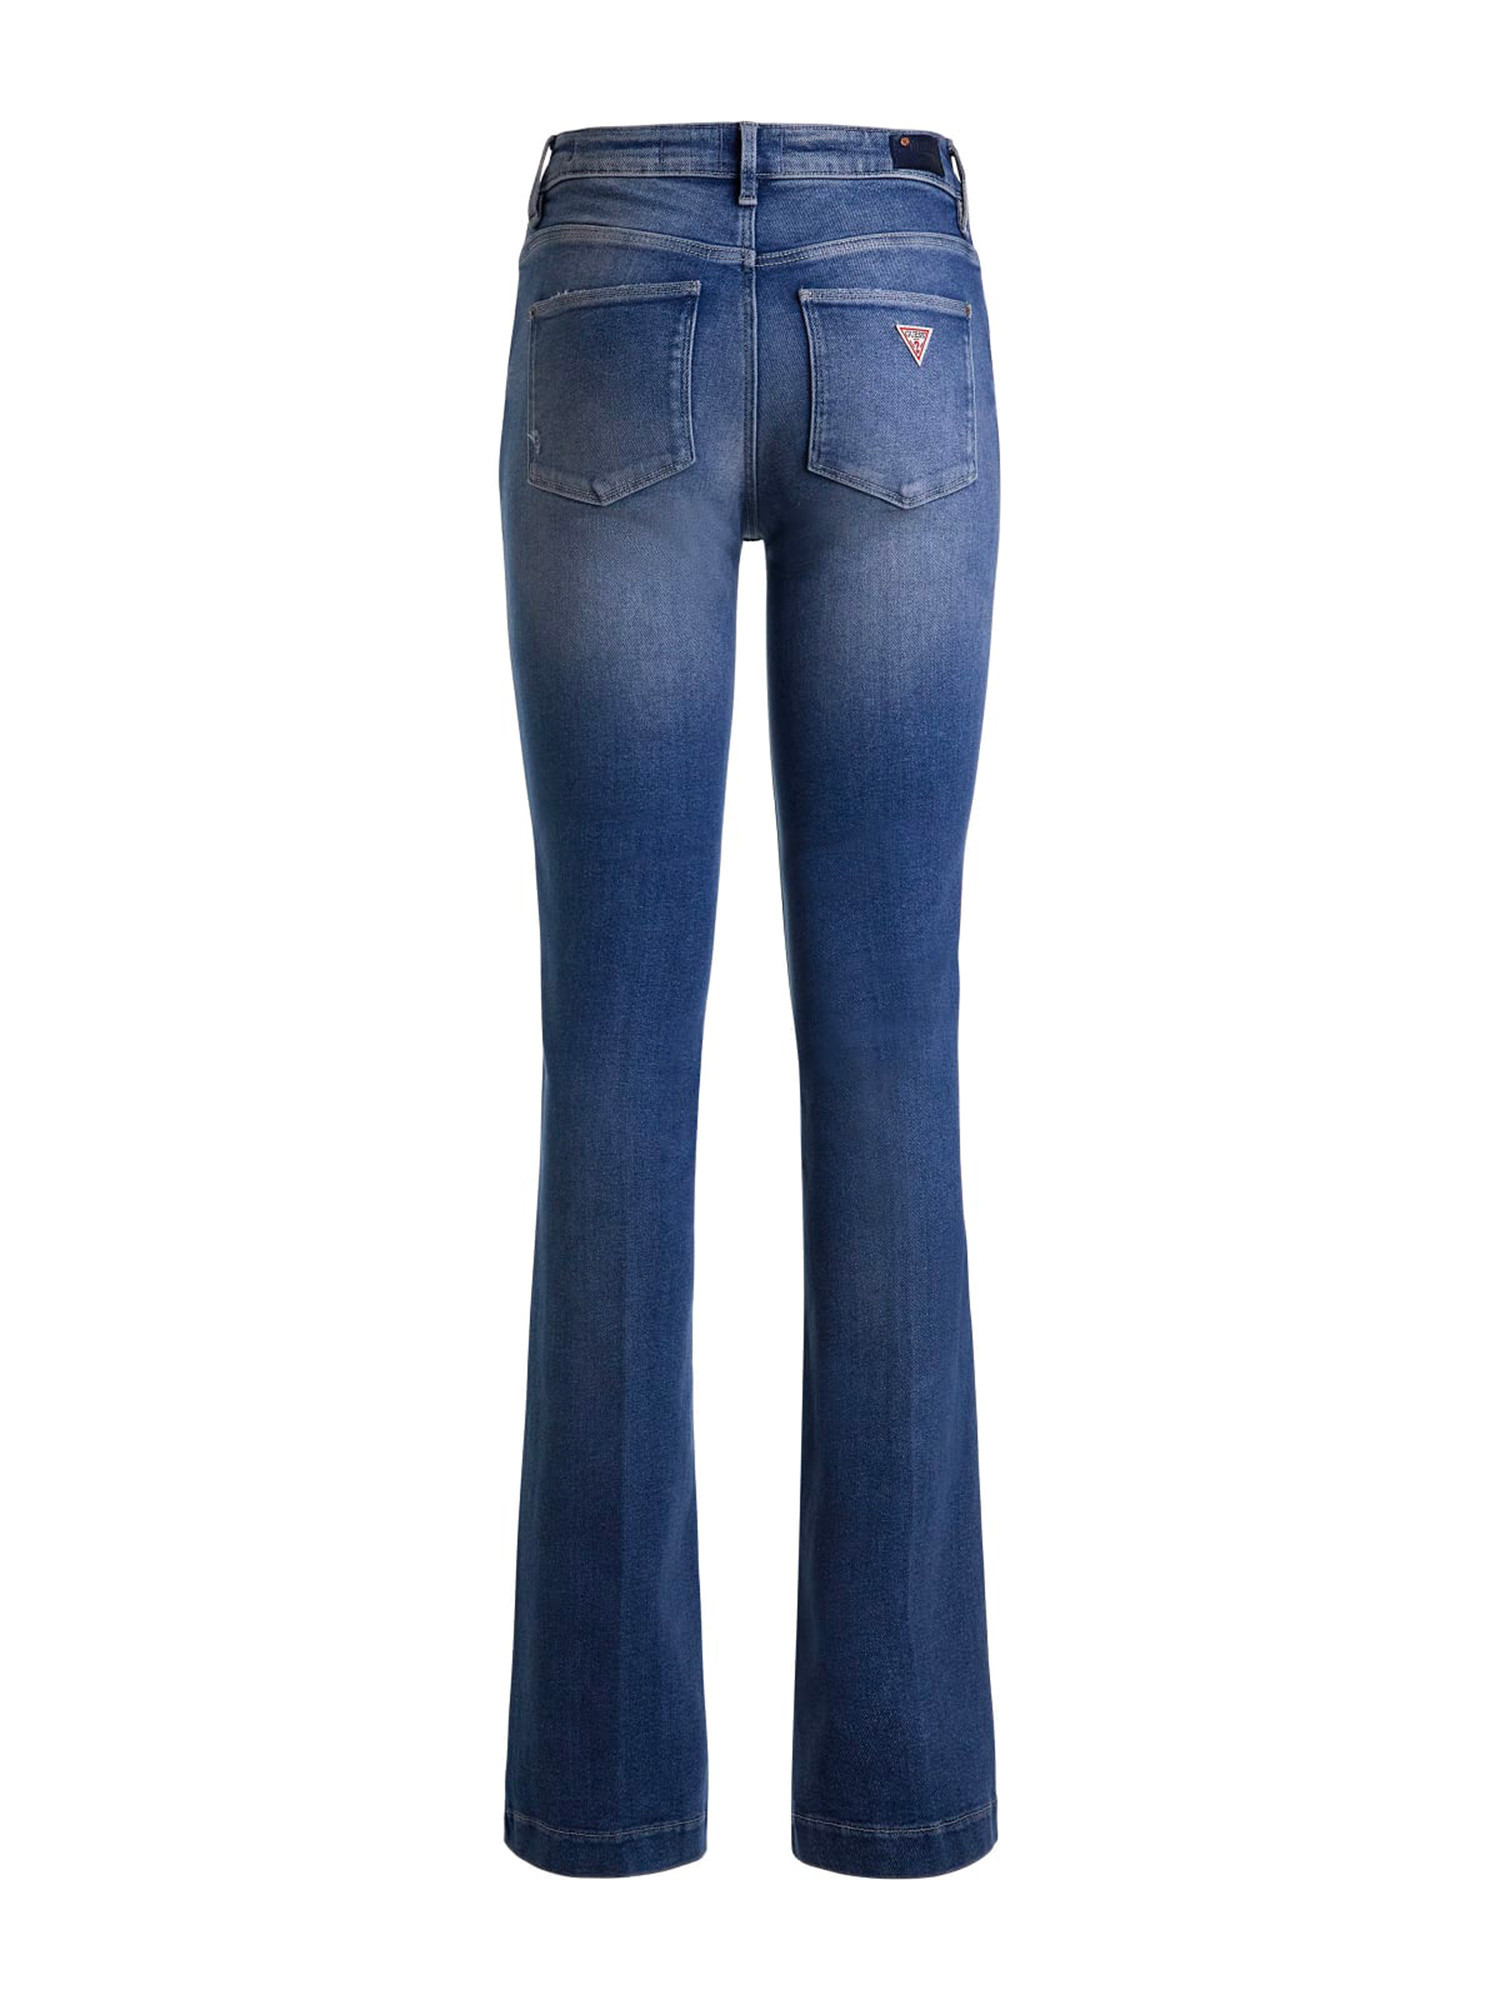 Guess - Jeans 5 tasche bootcut, Blu scuro, large image number 2